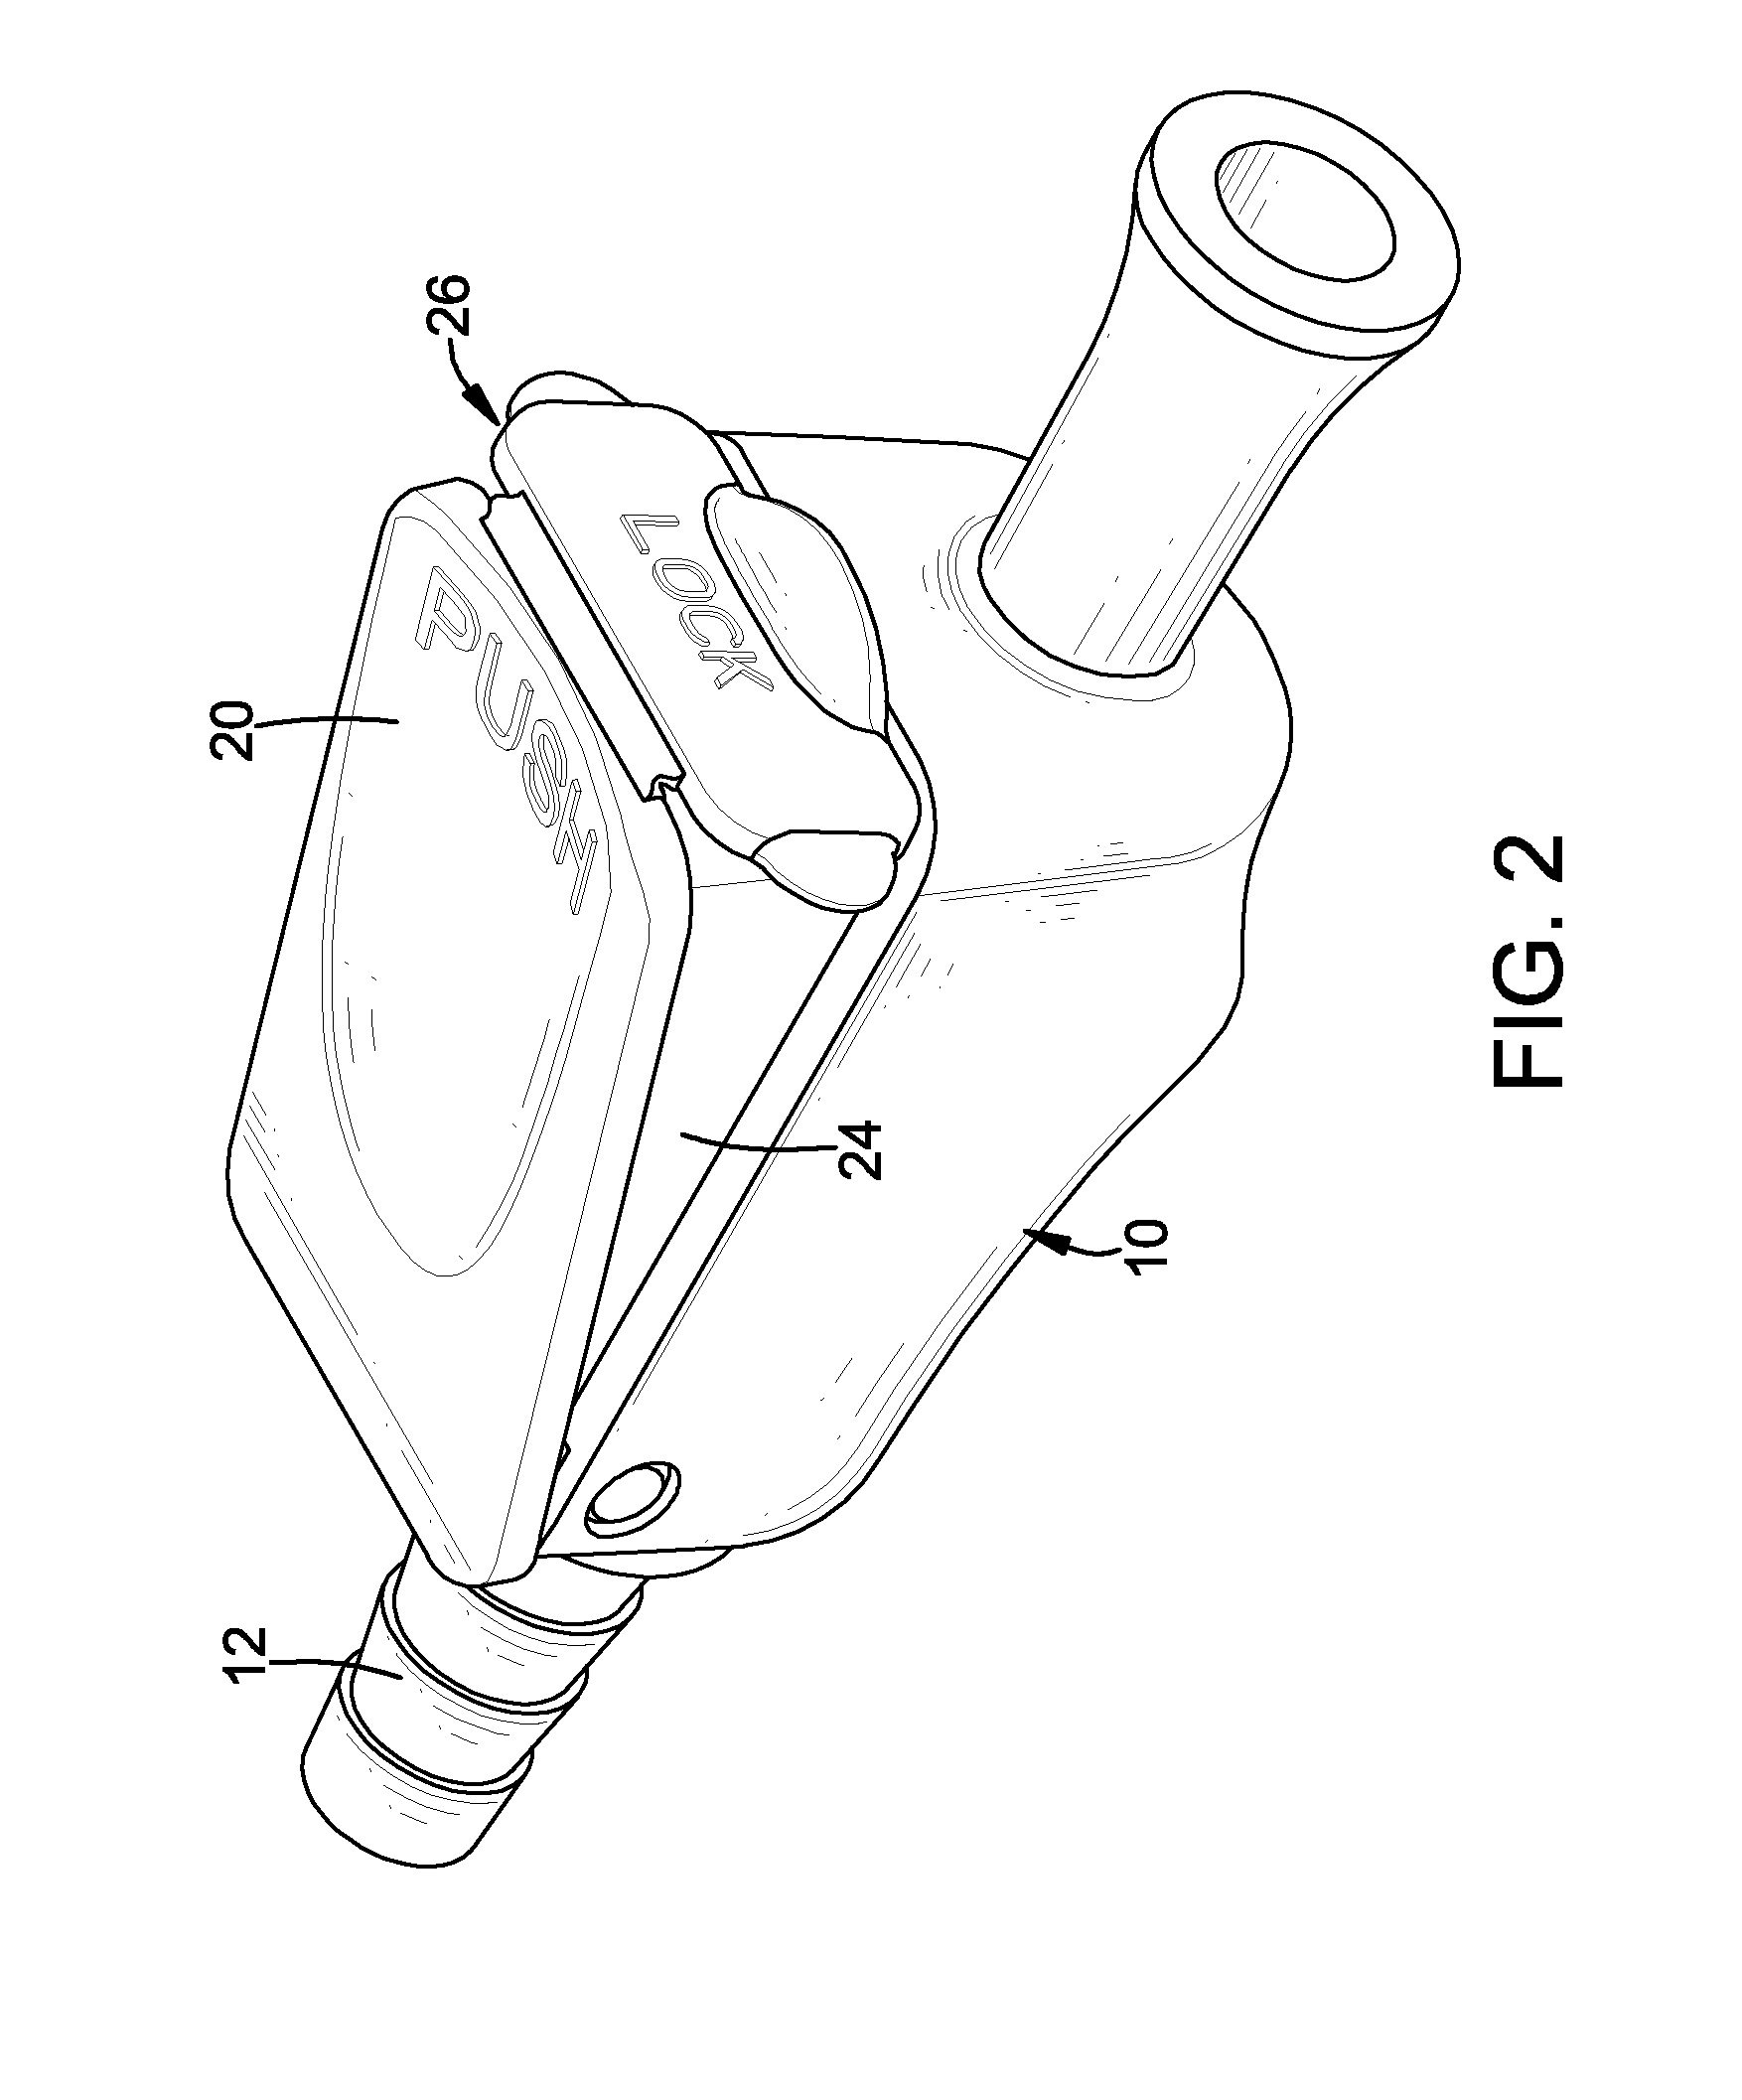 Manual switch for a closed suction tube